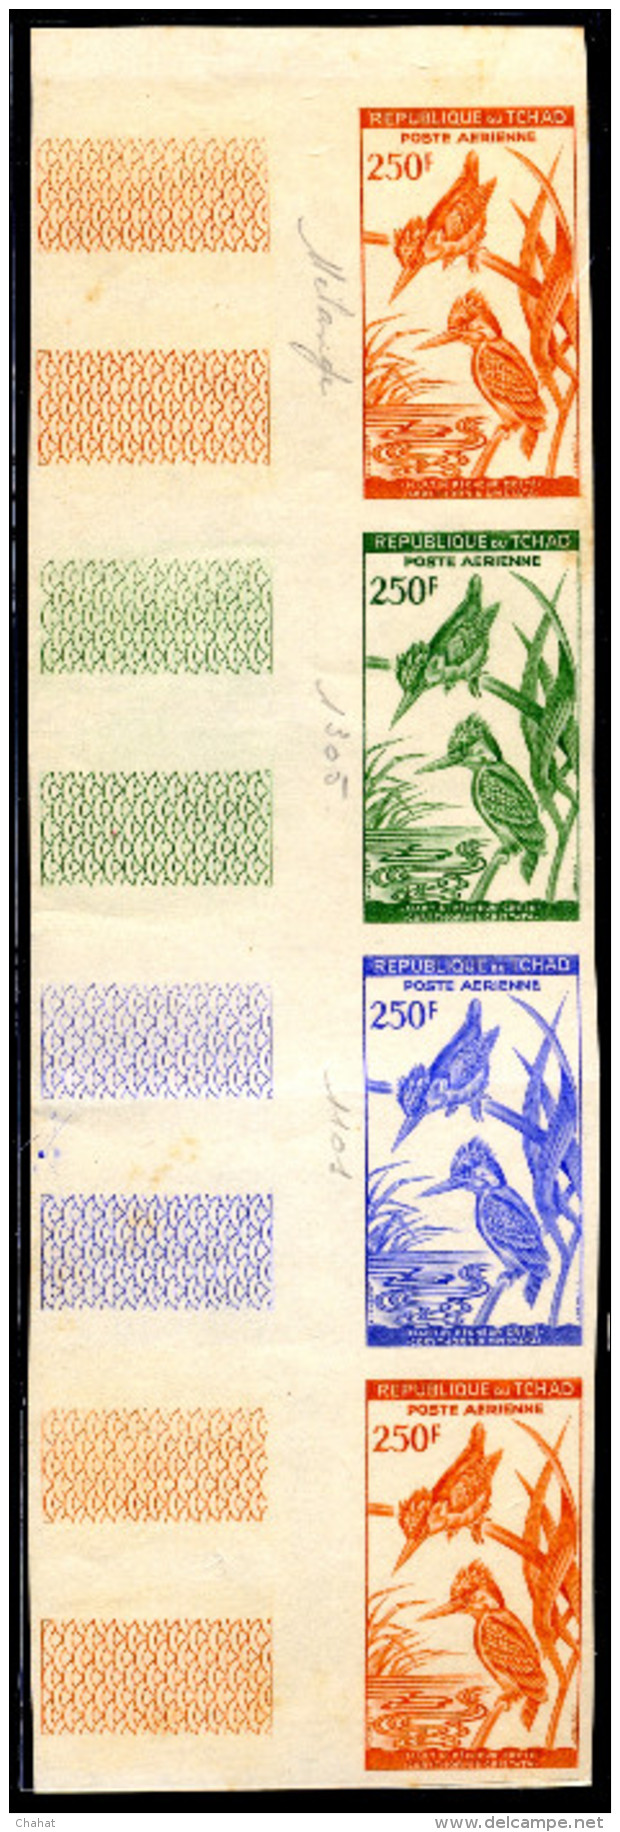 BIRDS-MALACHITE KINGFISHER-IMPERF COLOR TRIALS-STRIP OF 4 WITH JEWELS ON MARGINS-CHAD-1963-SCARCE-D2-11 - Pics & Grimpeurs